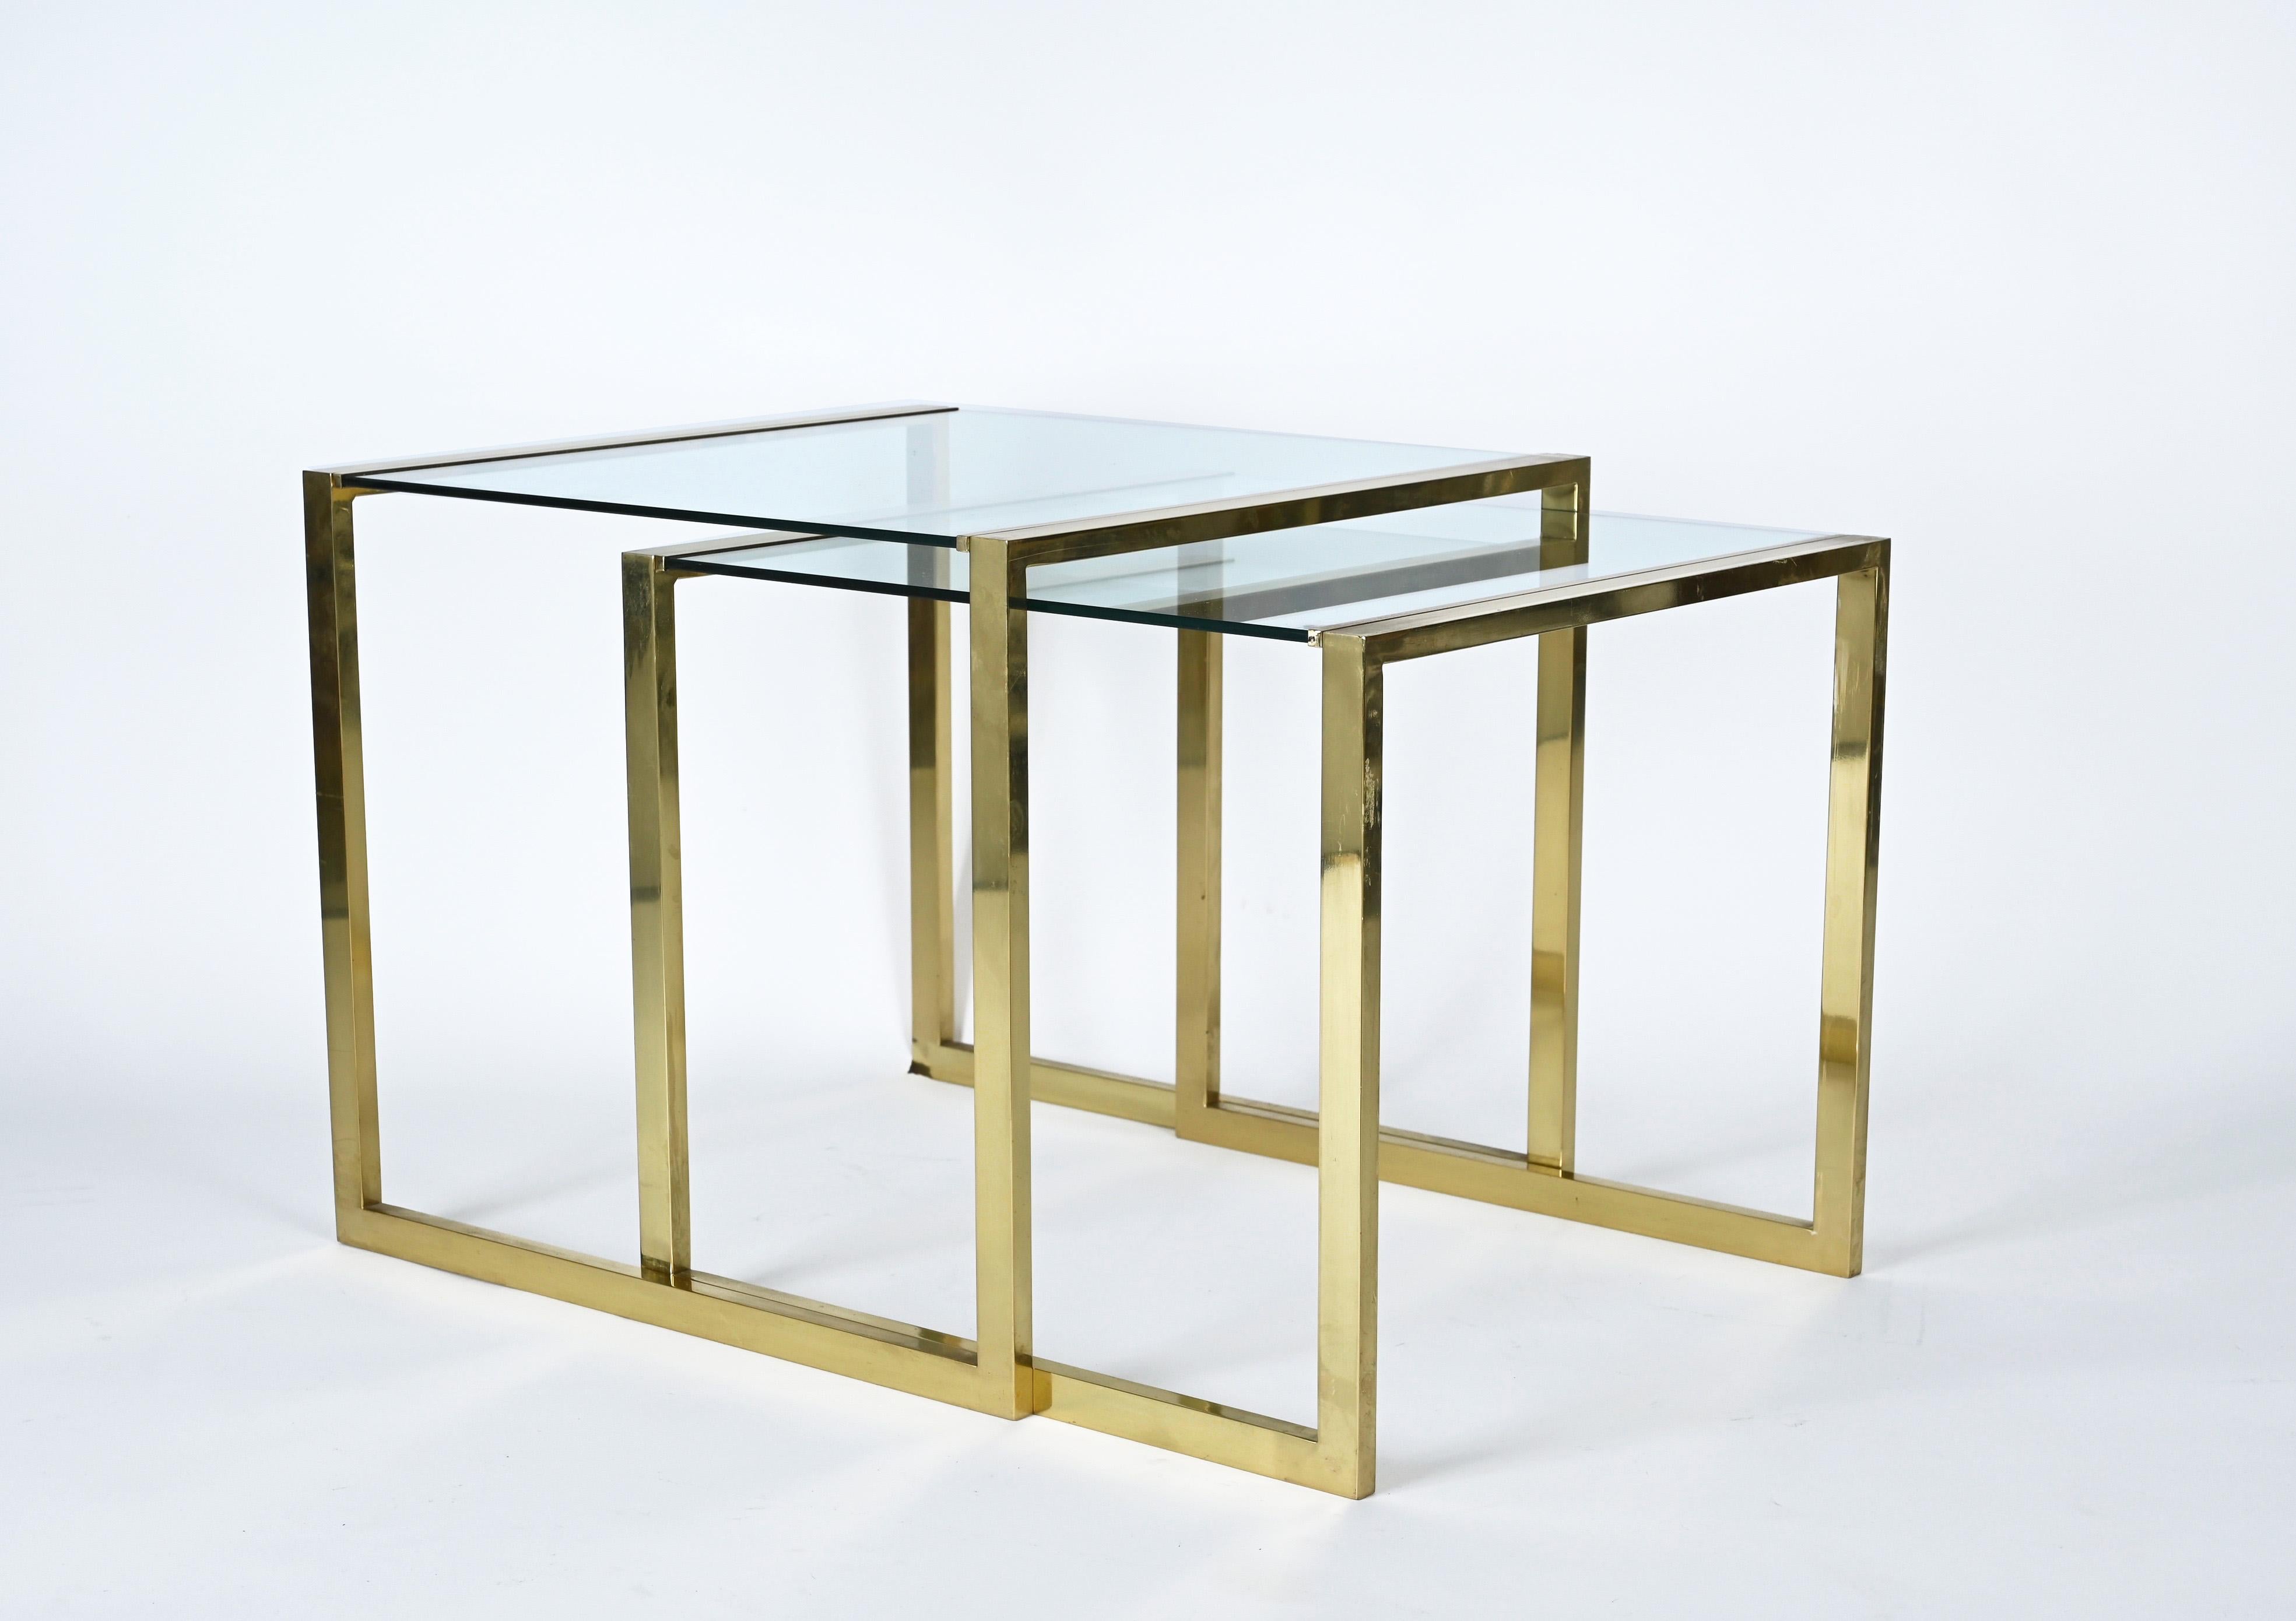 Amazing mid-century brass and crystal glass modern nesting tables. This fantastic piece was produced in Italy during the 1970s.

Very classic midcentury pair of nesting tables from the 70s, with crystal glass tops mounted between the two